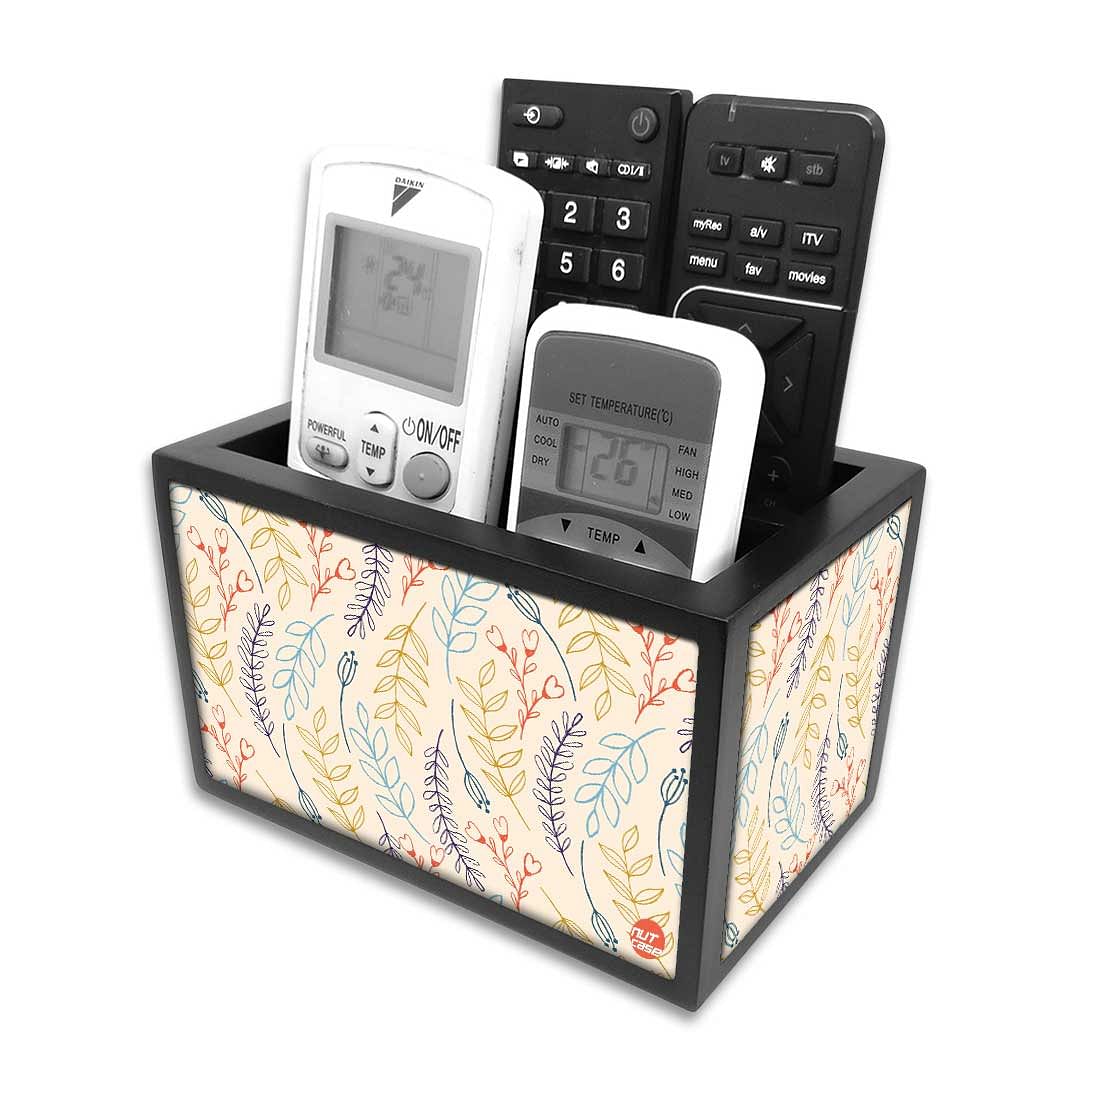 Beautiful Tv Control Organizer - Leaves And Branches - White Nutcase